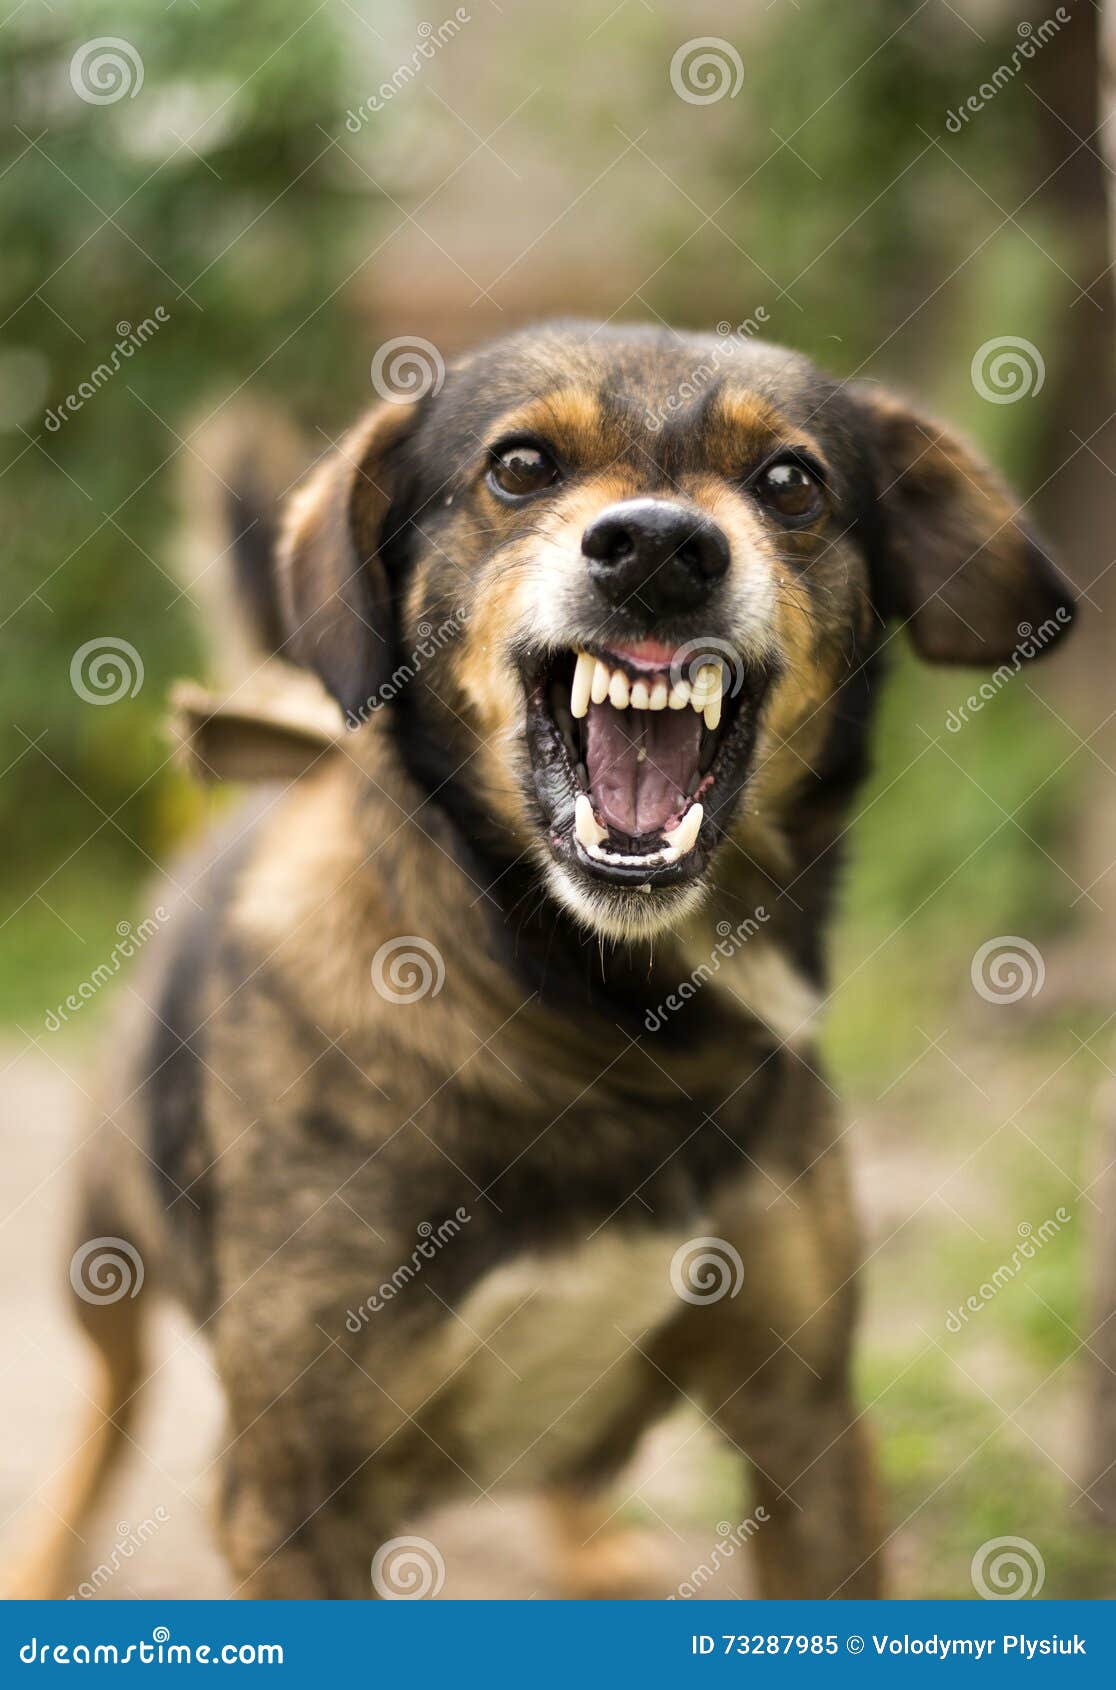 aggressive-angry-dog-enraged-grin-jaws-fangs-hungry-drool-73287985.jpg